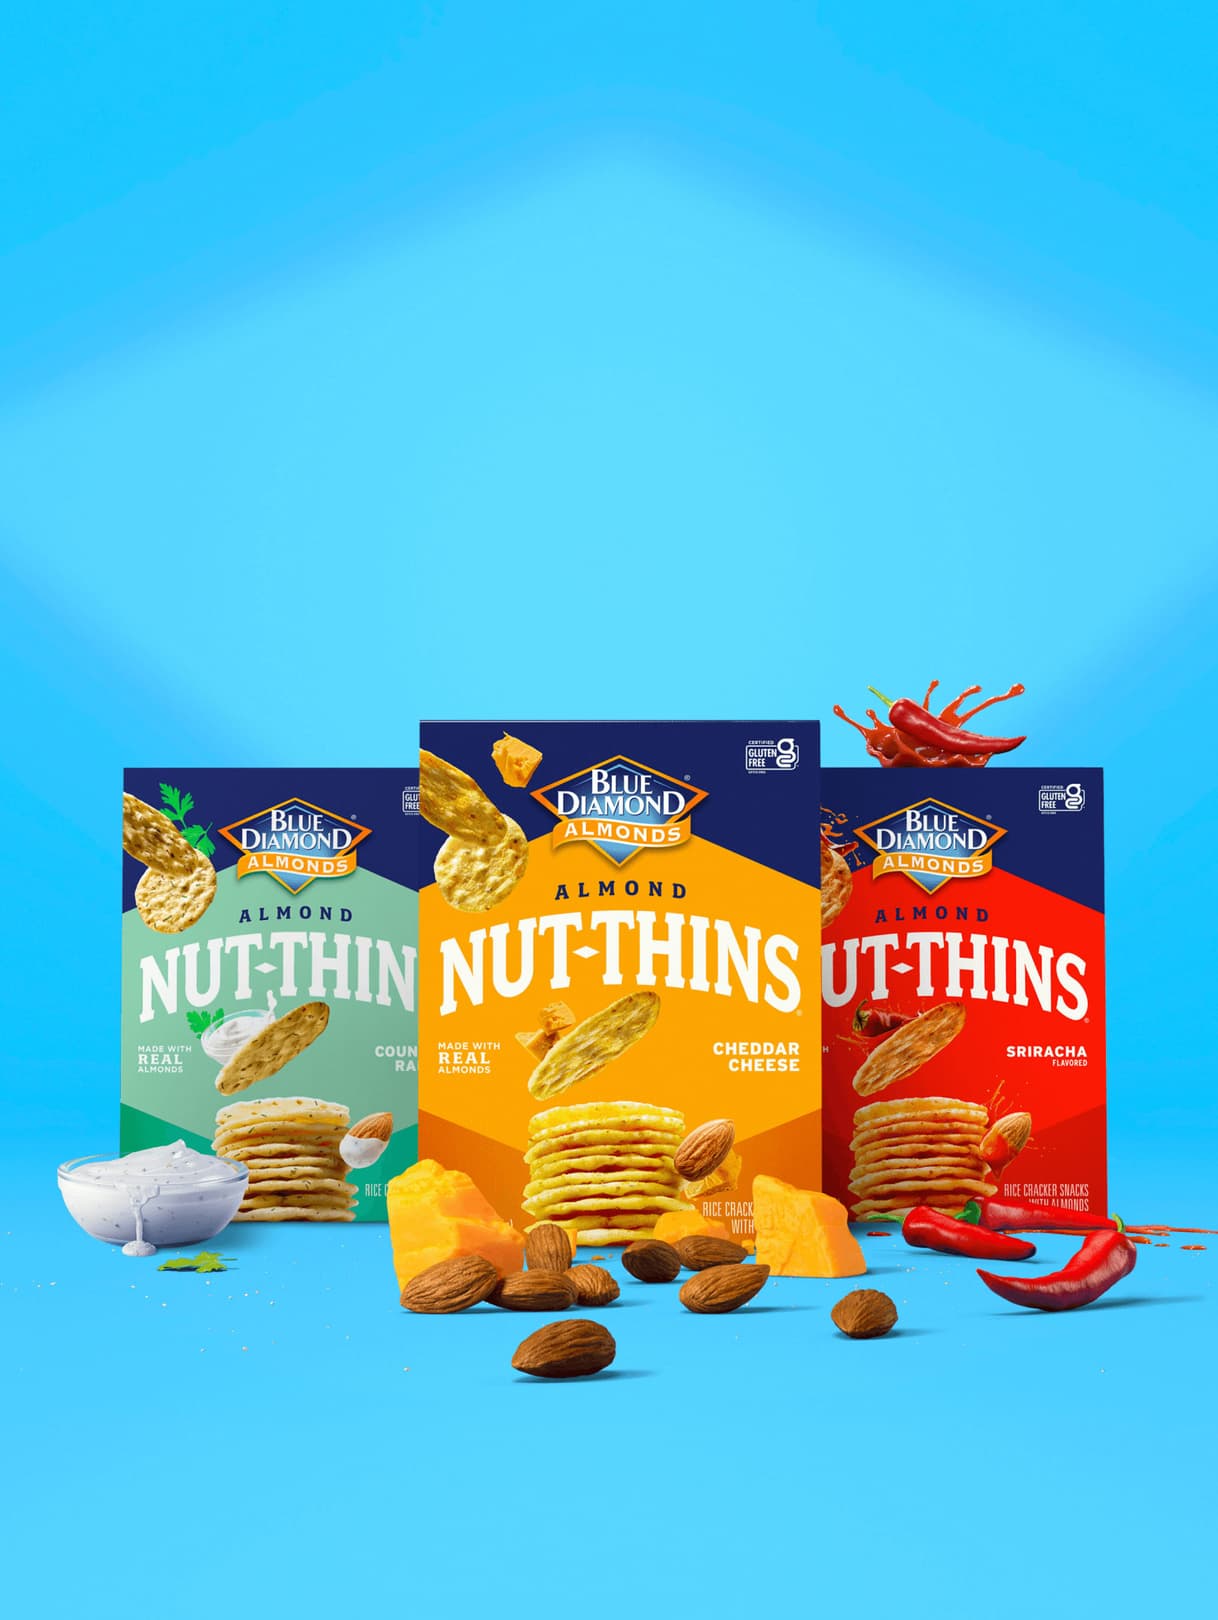 Boxes of Nut-Thins sitting on a blue background.